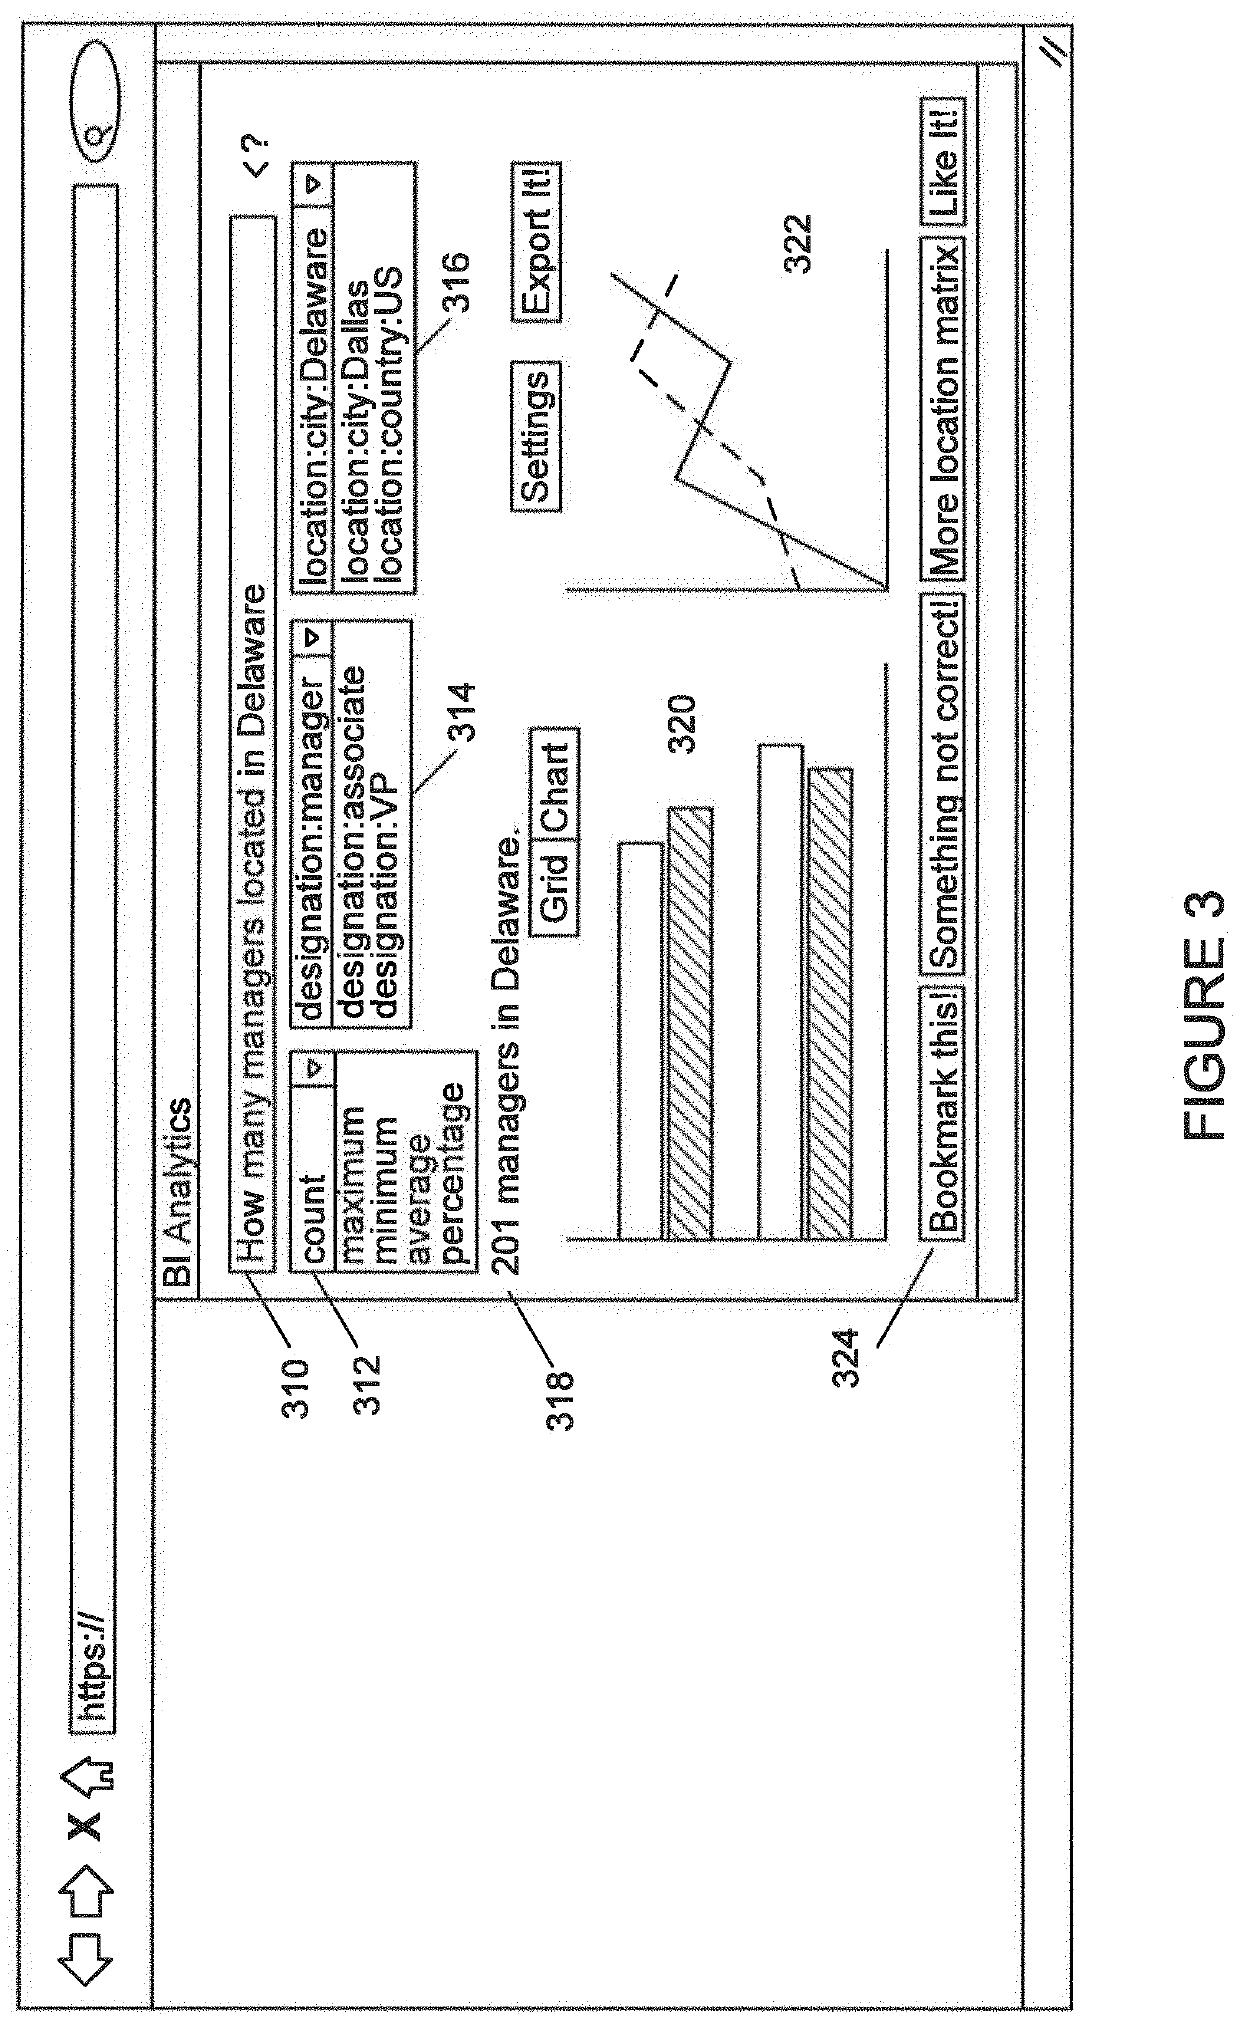 Systems and methods for automated analysis of business intelligence